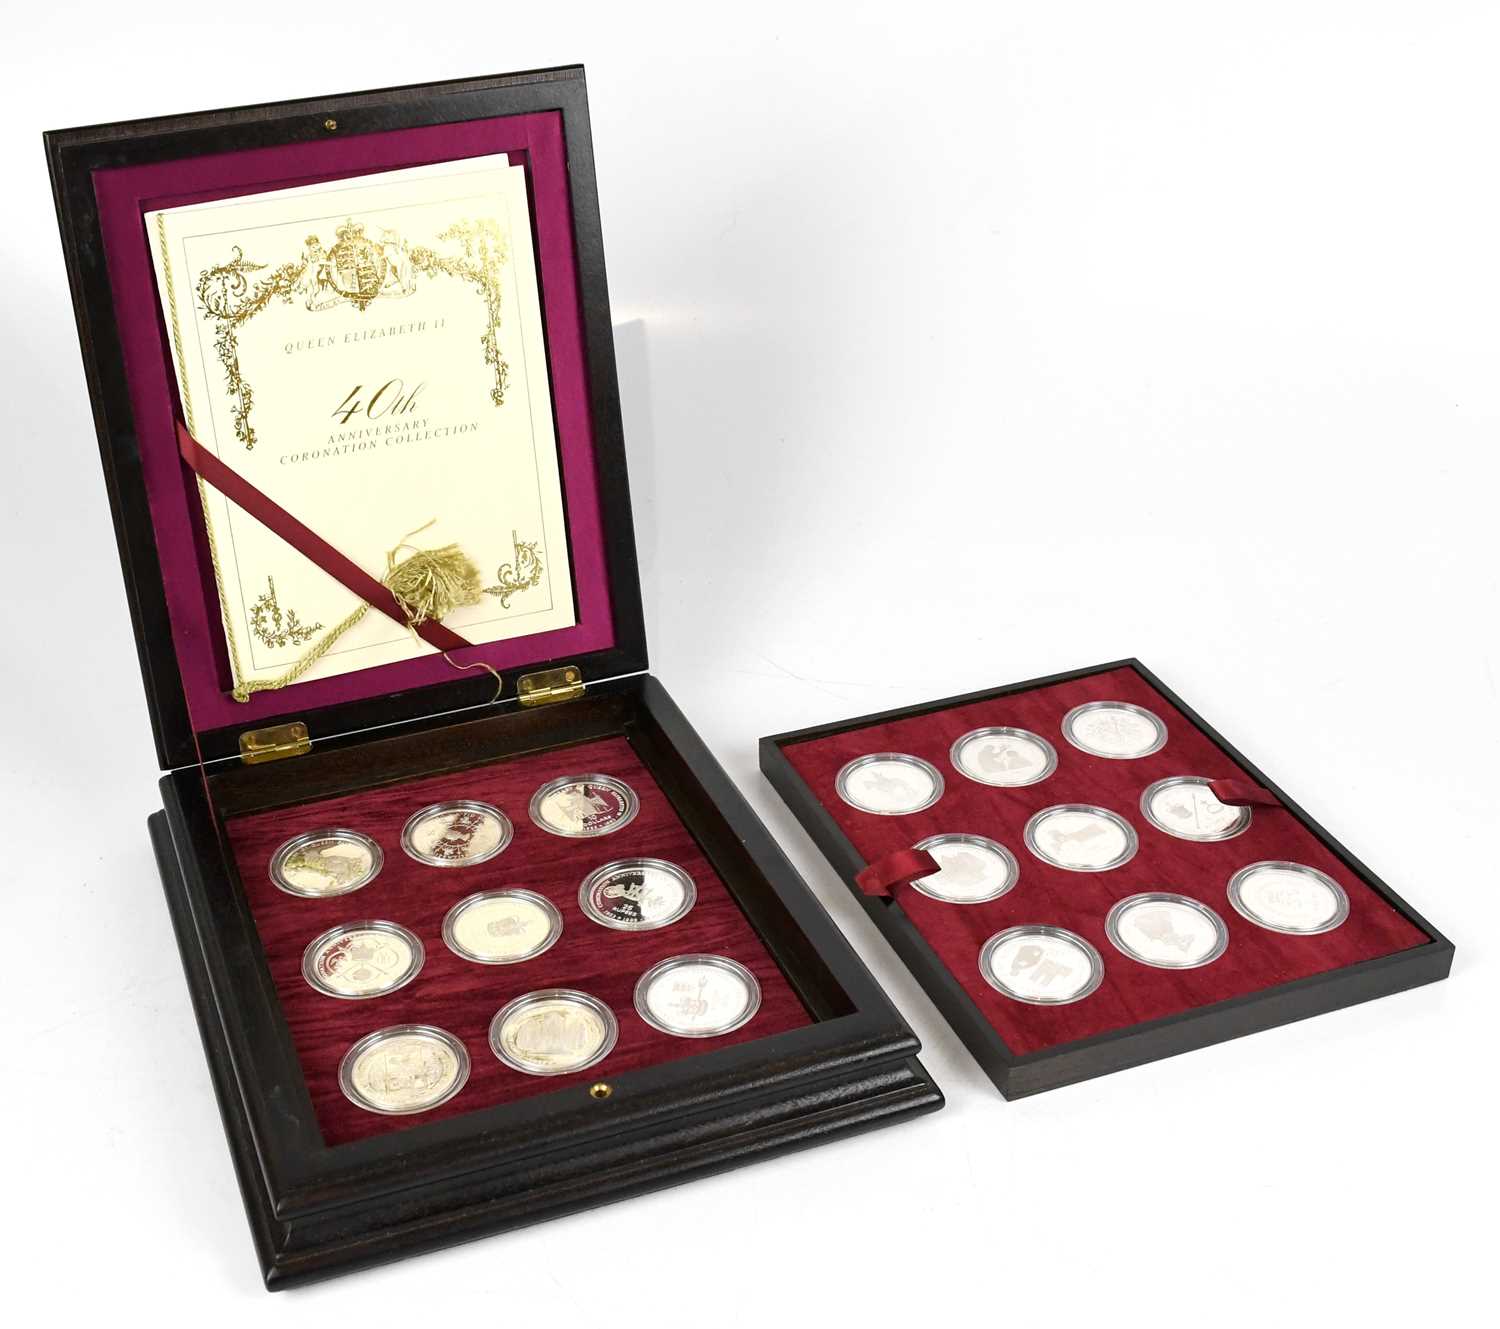 ROYAL MINT; a limited edition Queen Elizabeth II 40th Anniversary Coronation Collection,